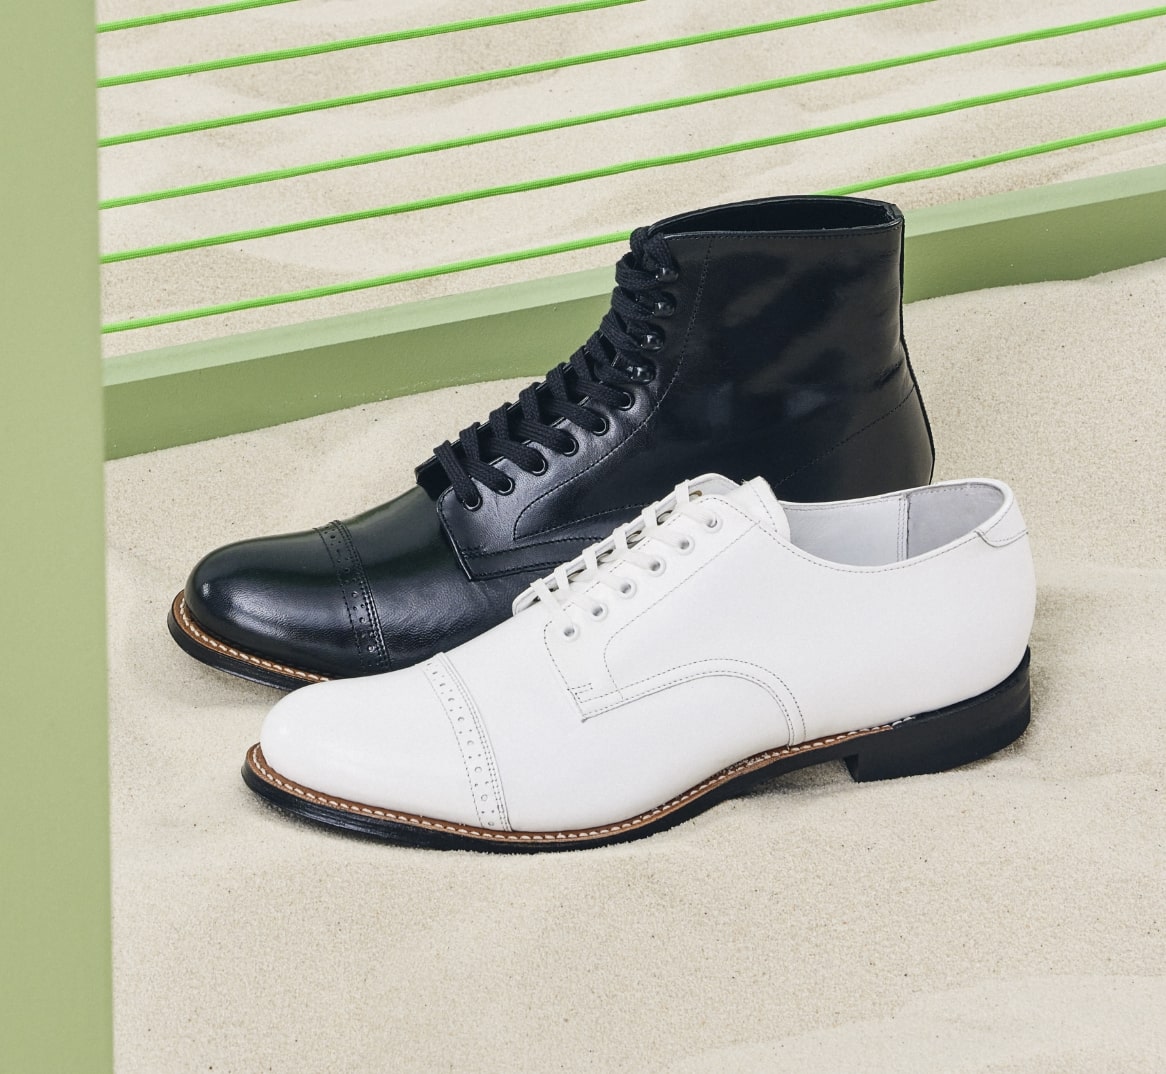 Click to shop classic styles. Image features the Madison cap toe oxford and boot.